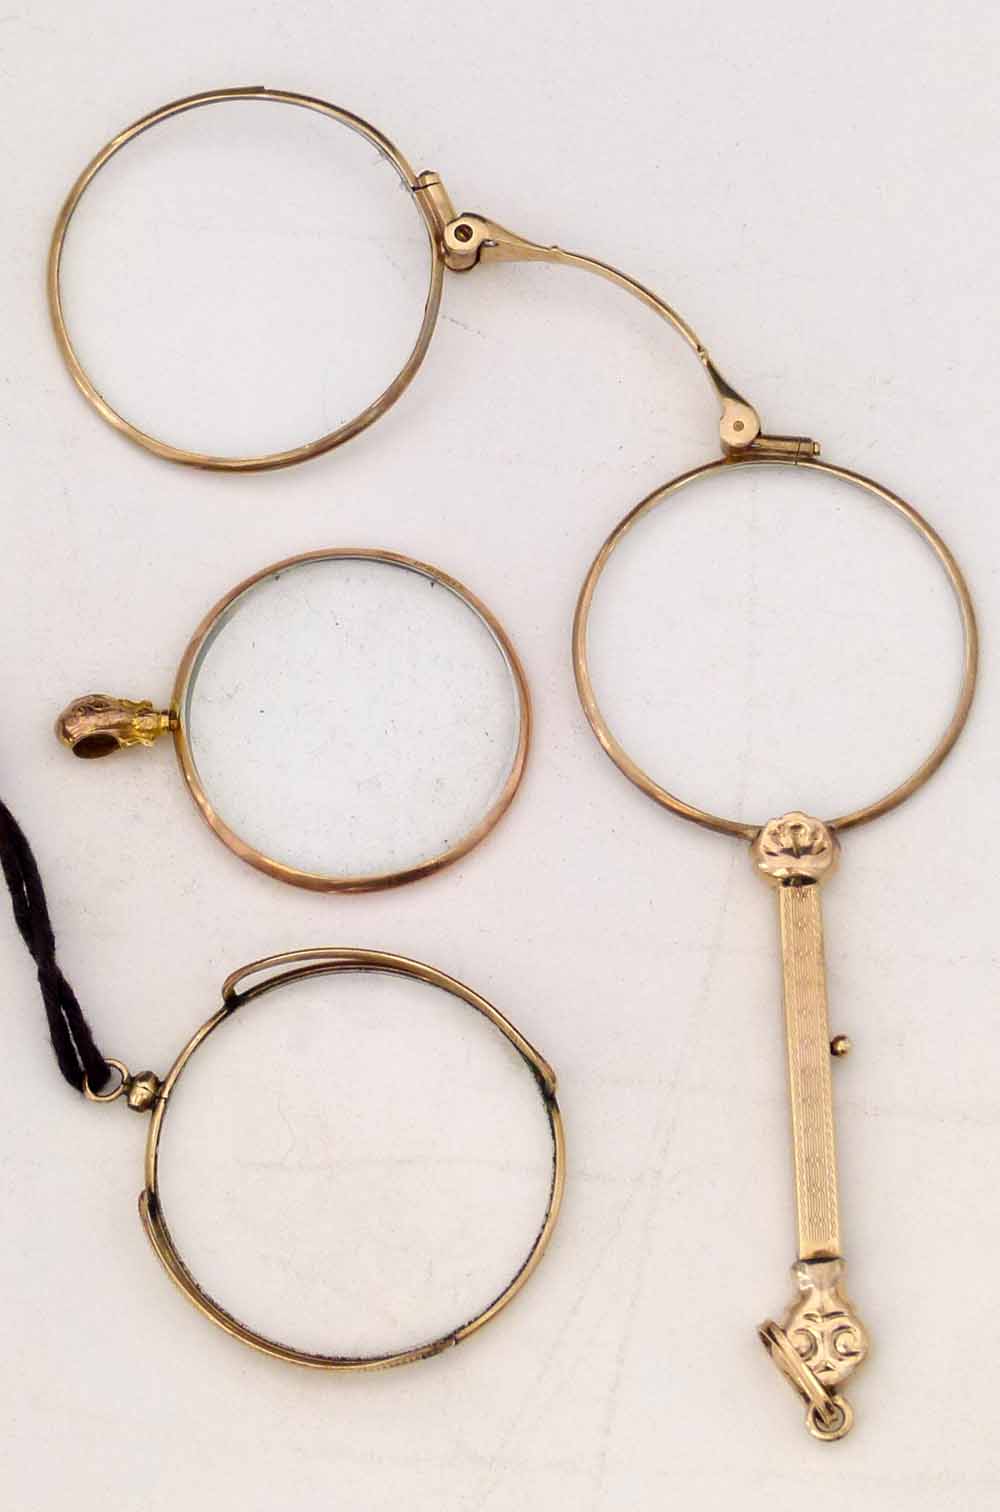 Unmarked yellow metal lorgnette with engraved decoration and a release button on the shaft, length